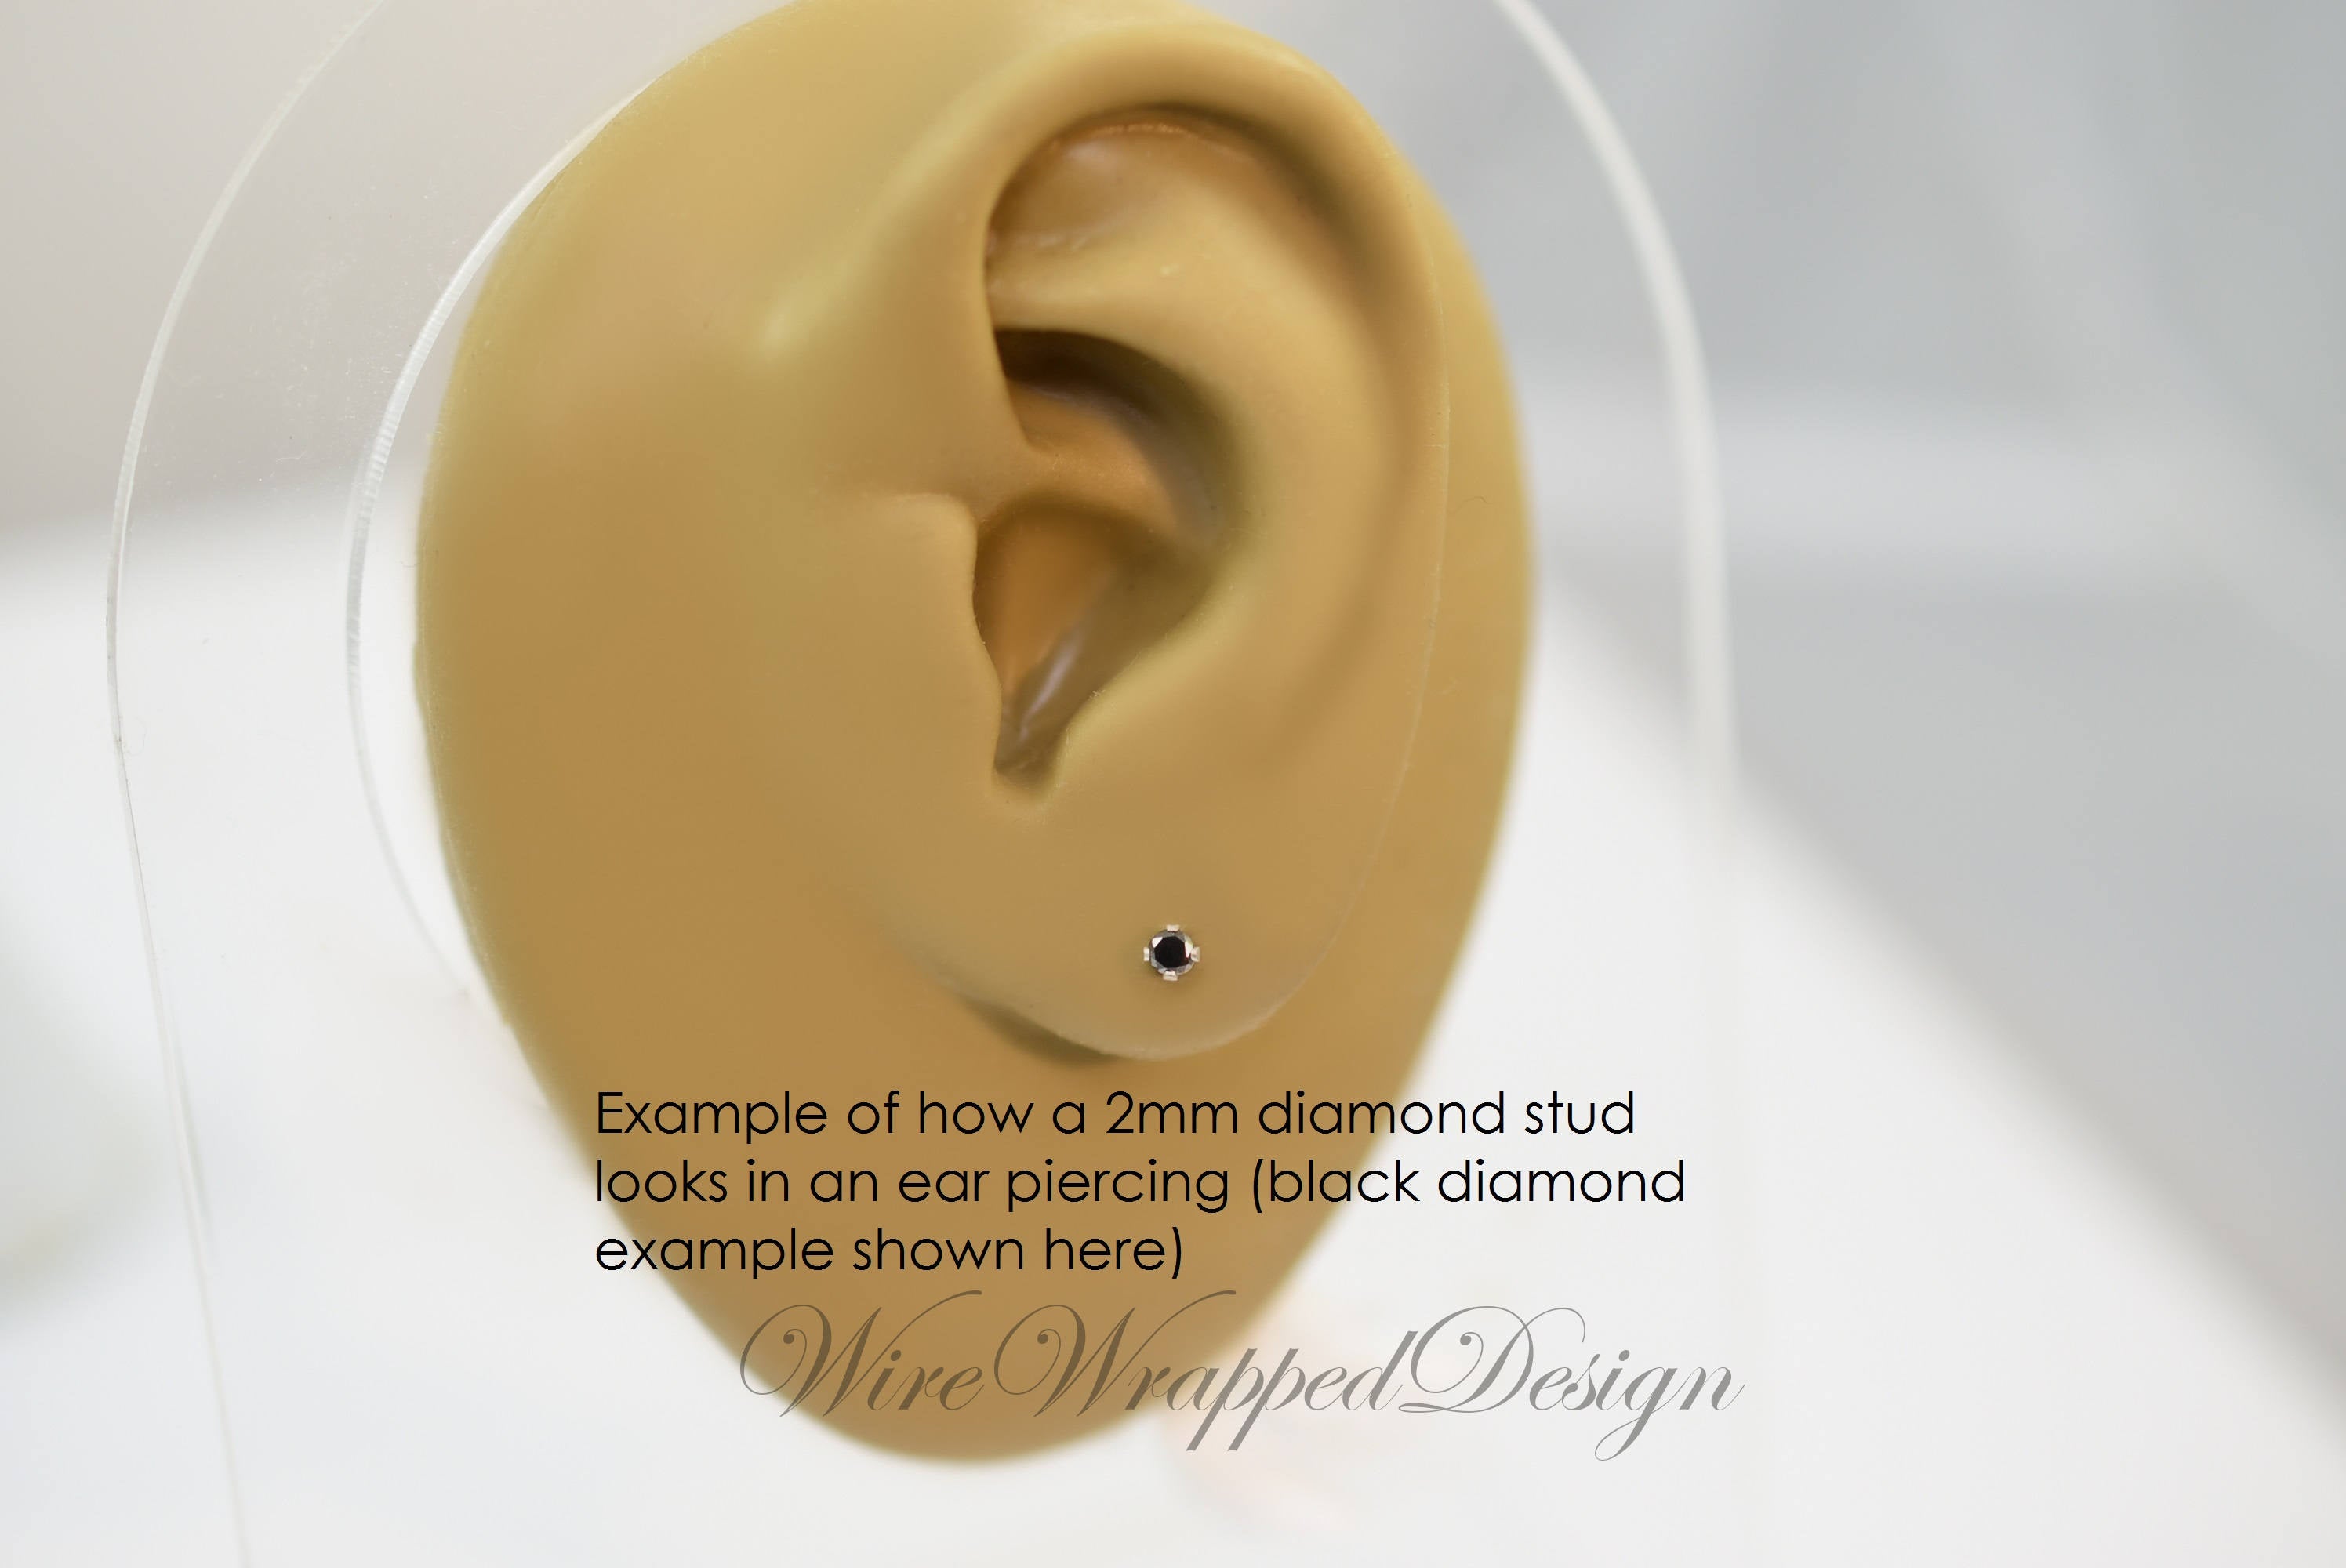 Genuine BLACK DIAMOND Earring Studs 2mm 0.08tcw Post 14k Solid Gold (Yellow, Rose or White), Platinum, Silver Lobe Cartilage Helix Tragus